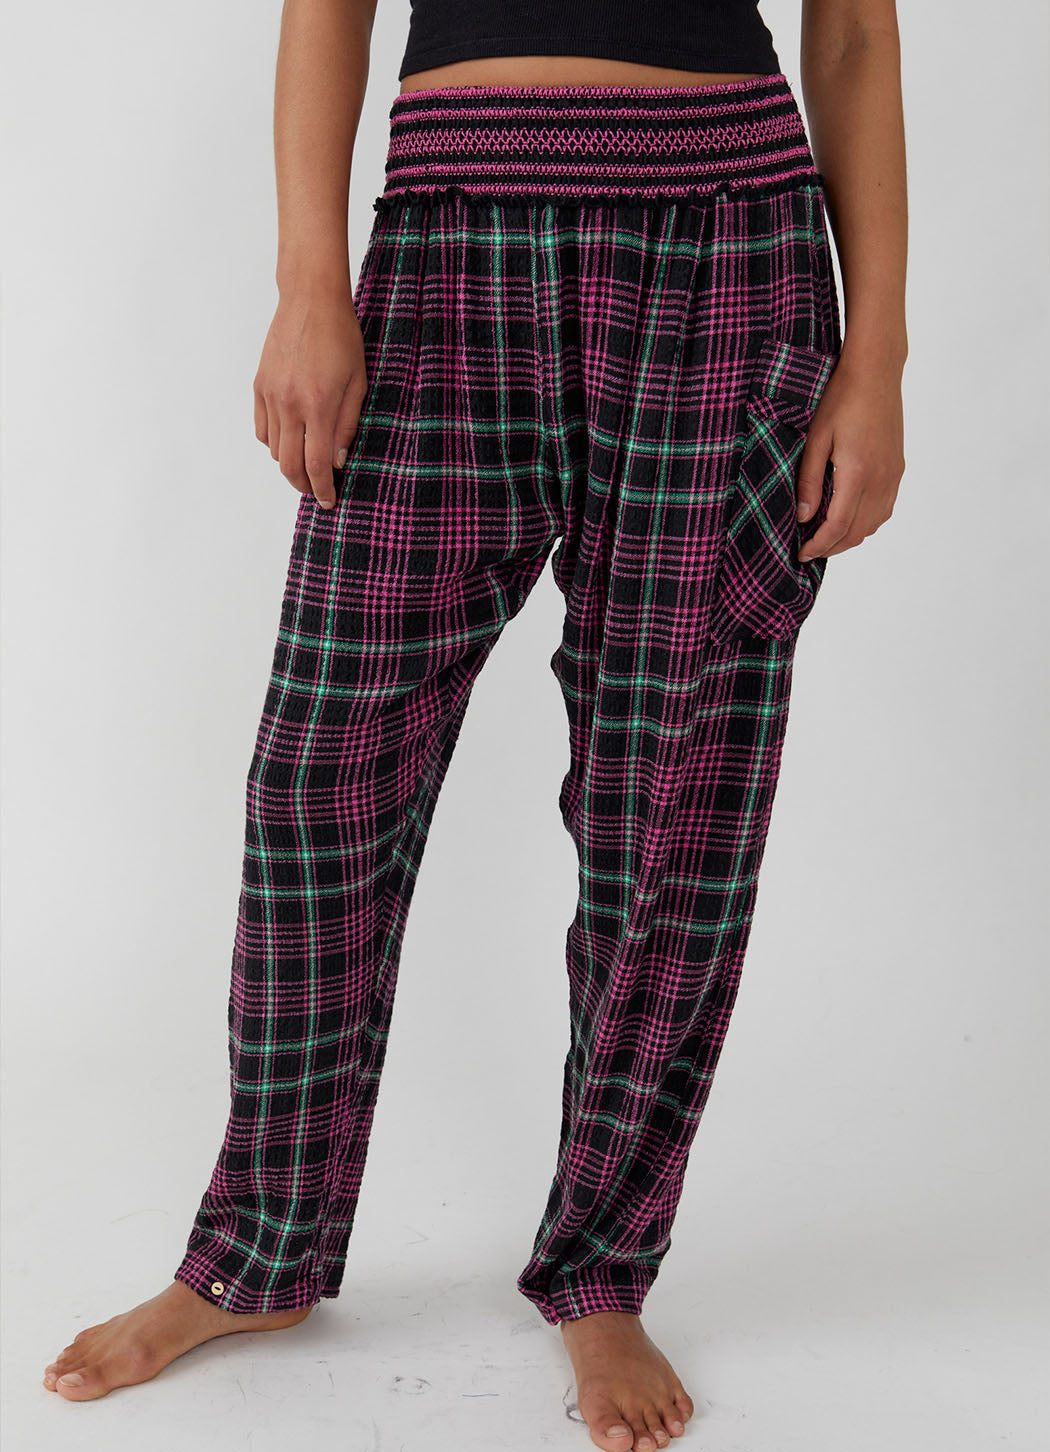 Free People Plaid About You Pants – Details Direct